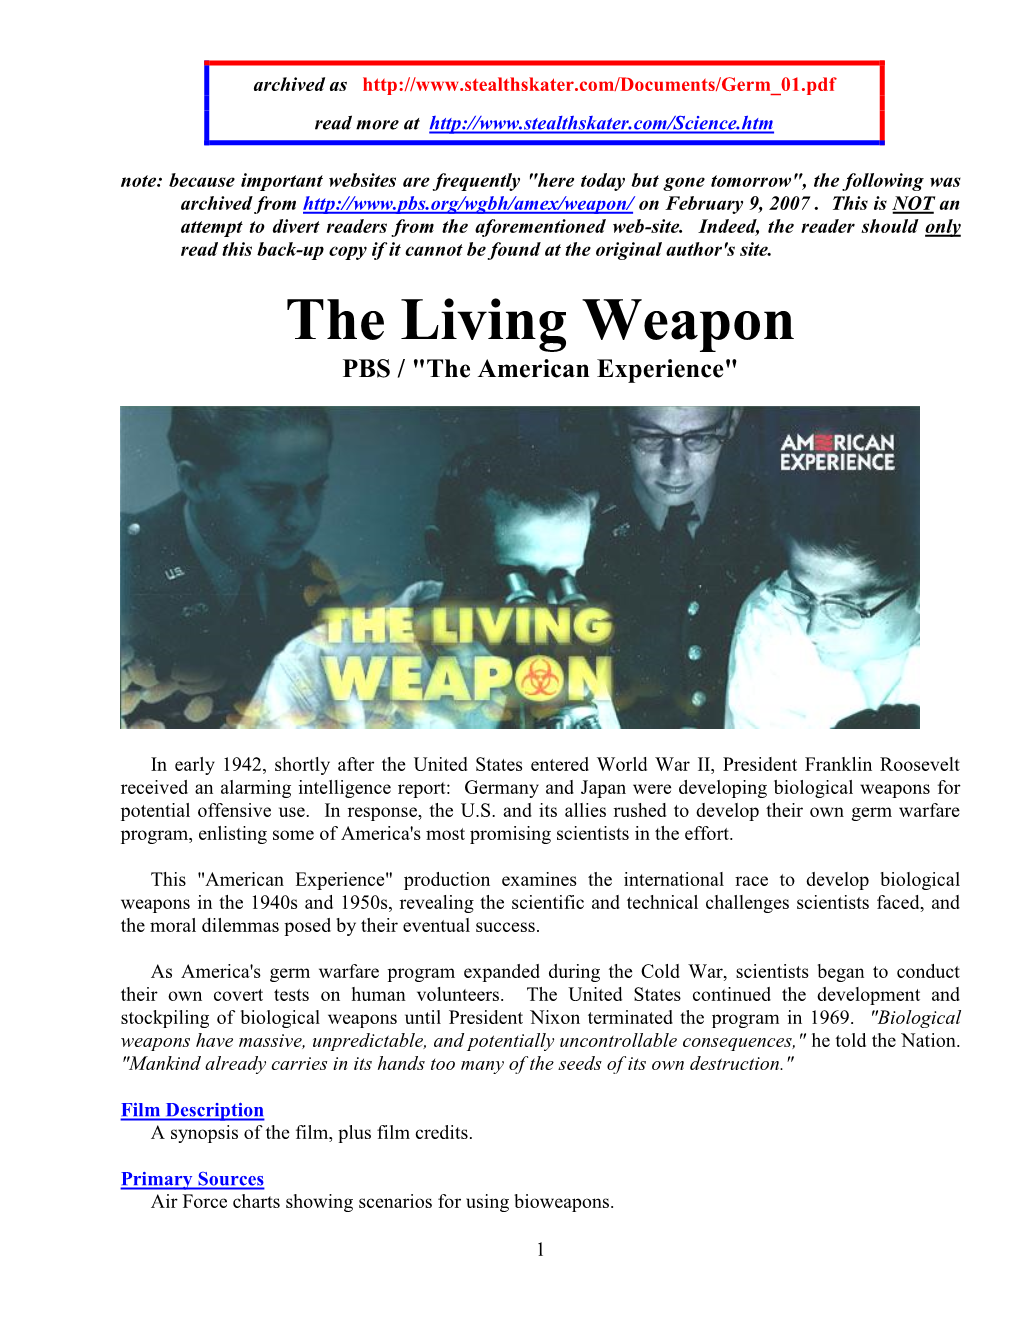 The Living Weapon PBS / "The American Experience"